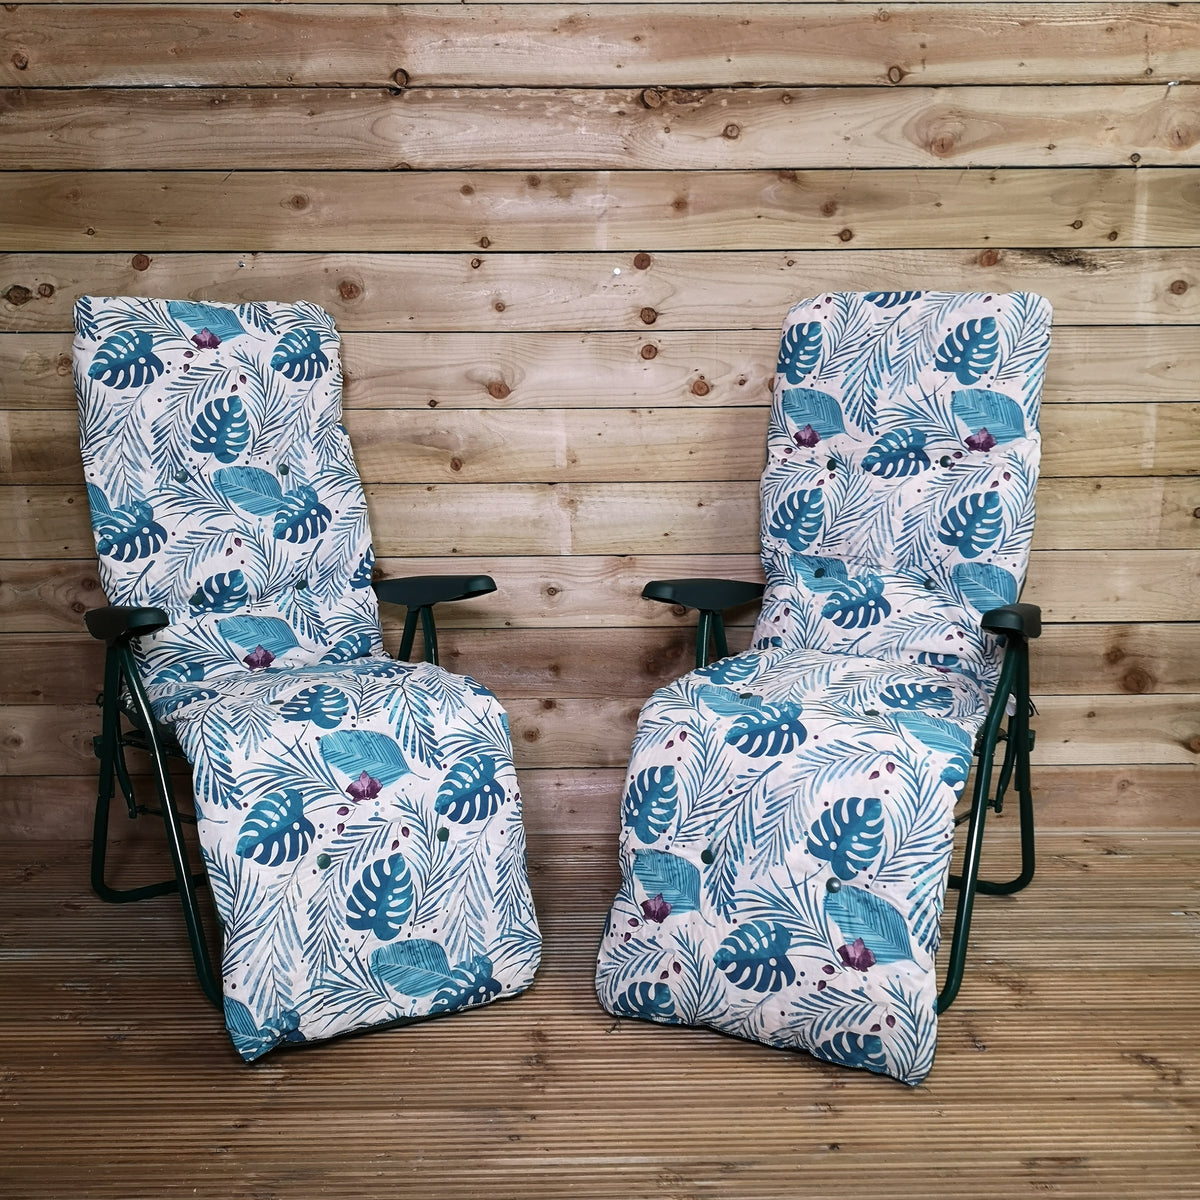 Pack of Two Padded Outdoor Garden Patio Recliners / Sun Loungers with Tropical Leaf Design